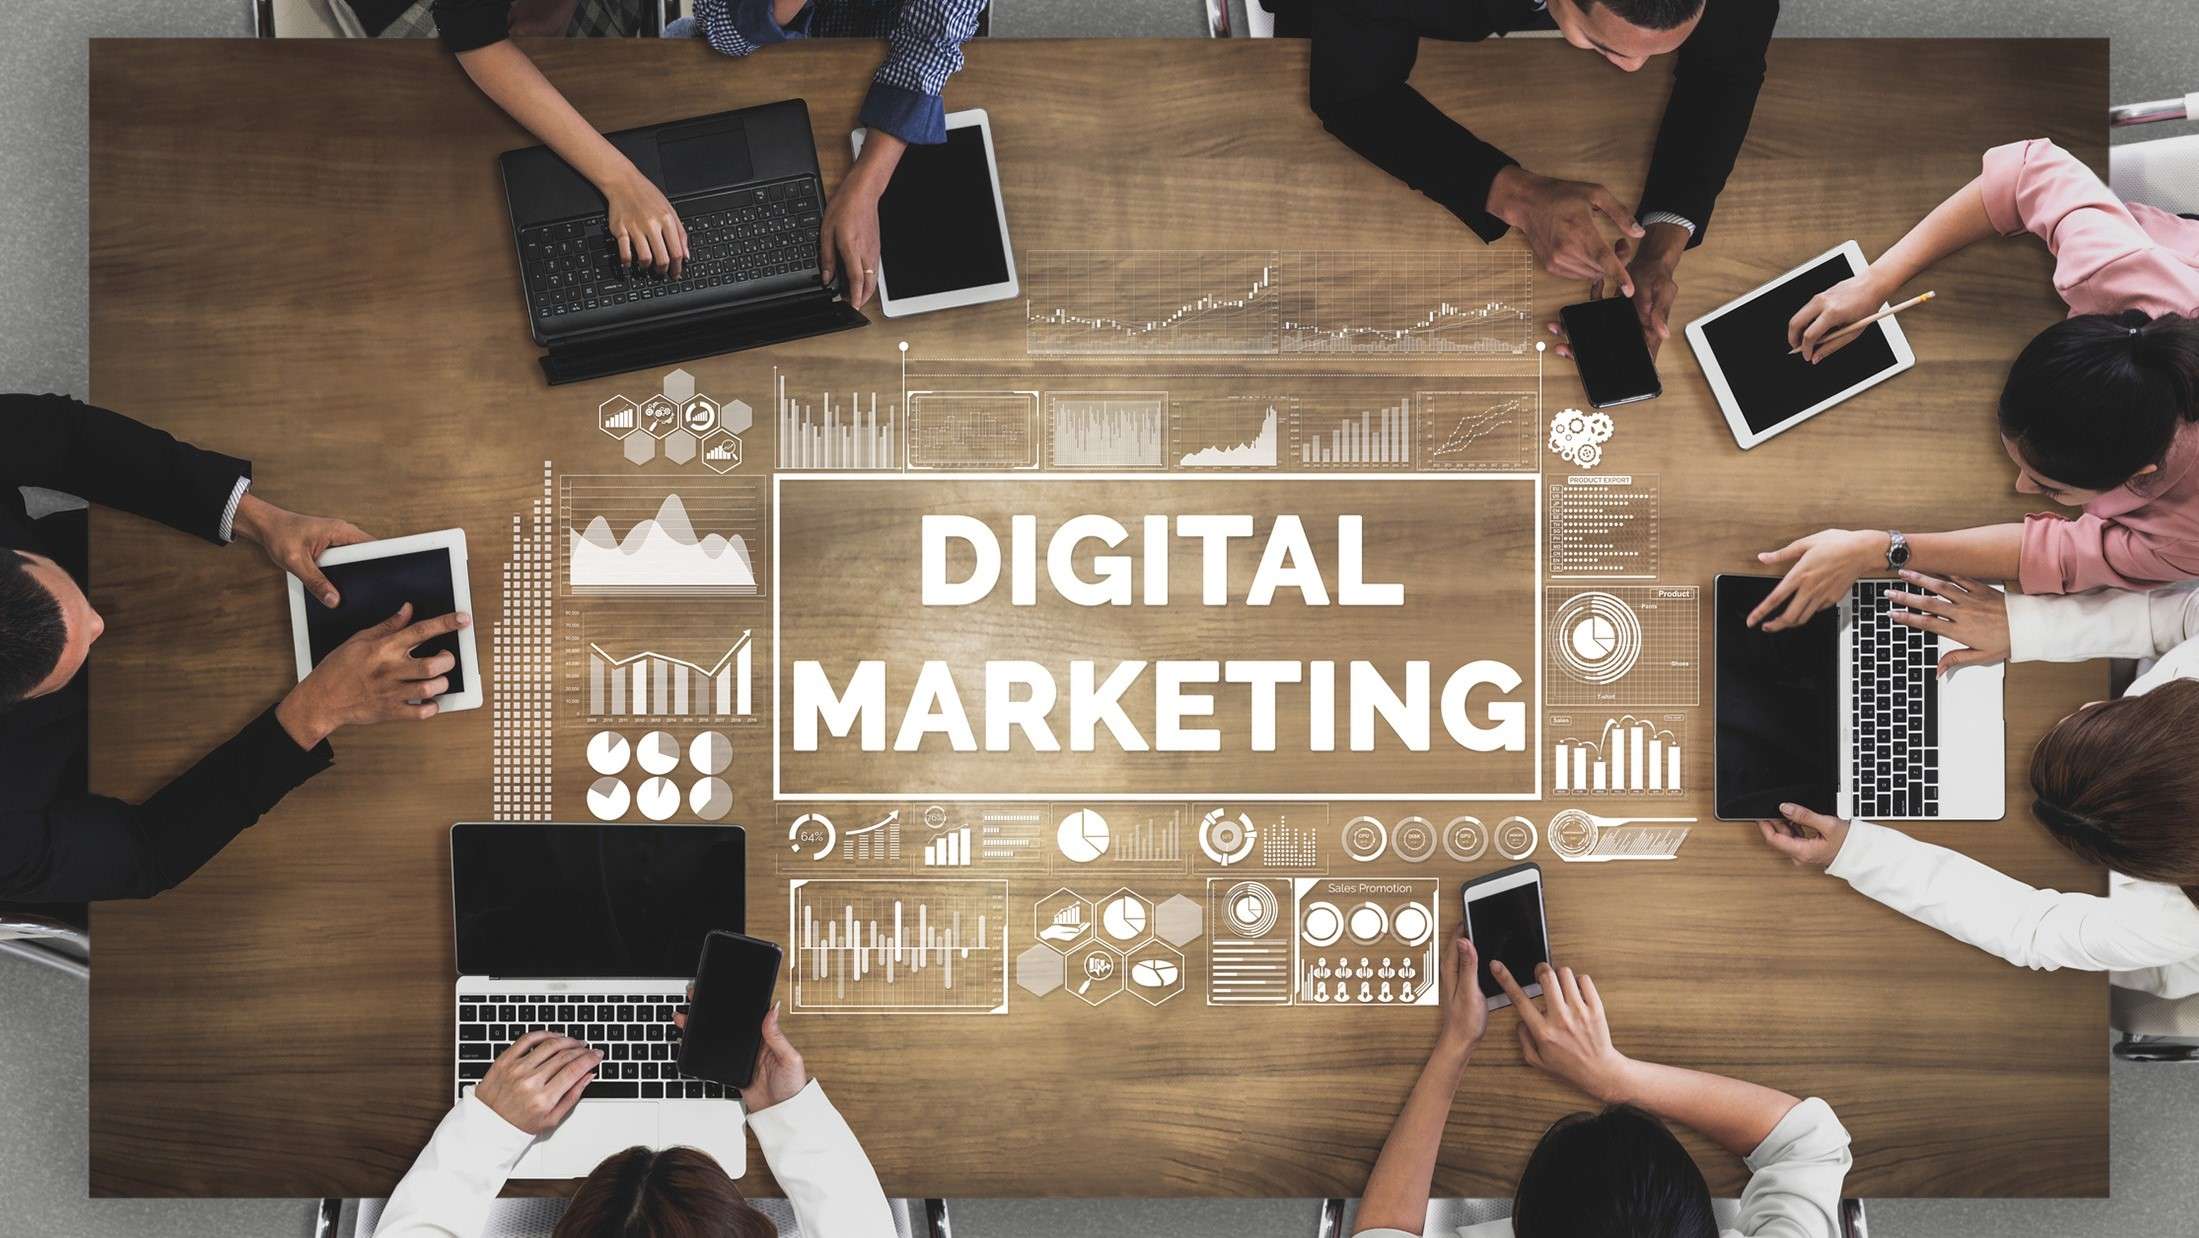 Top 10 Digital Marketing Course Available in Malaysia